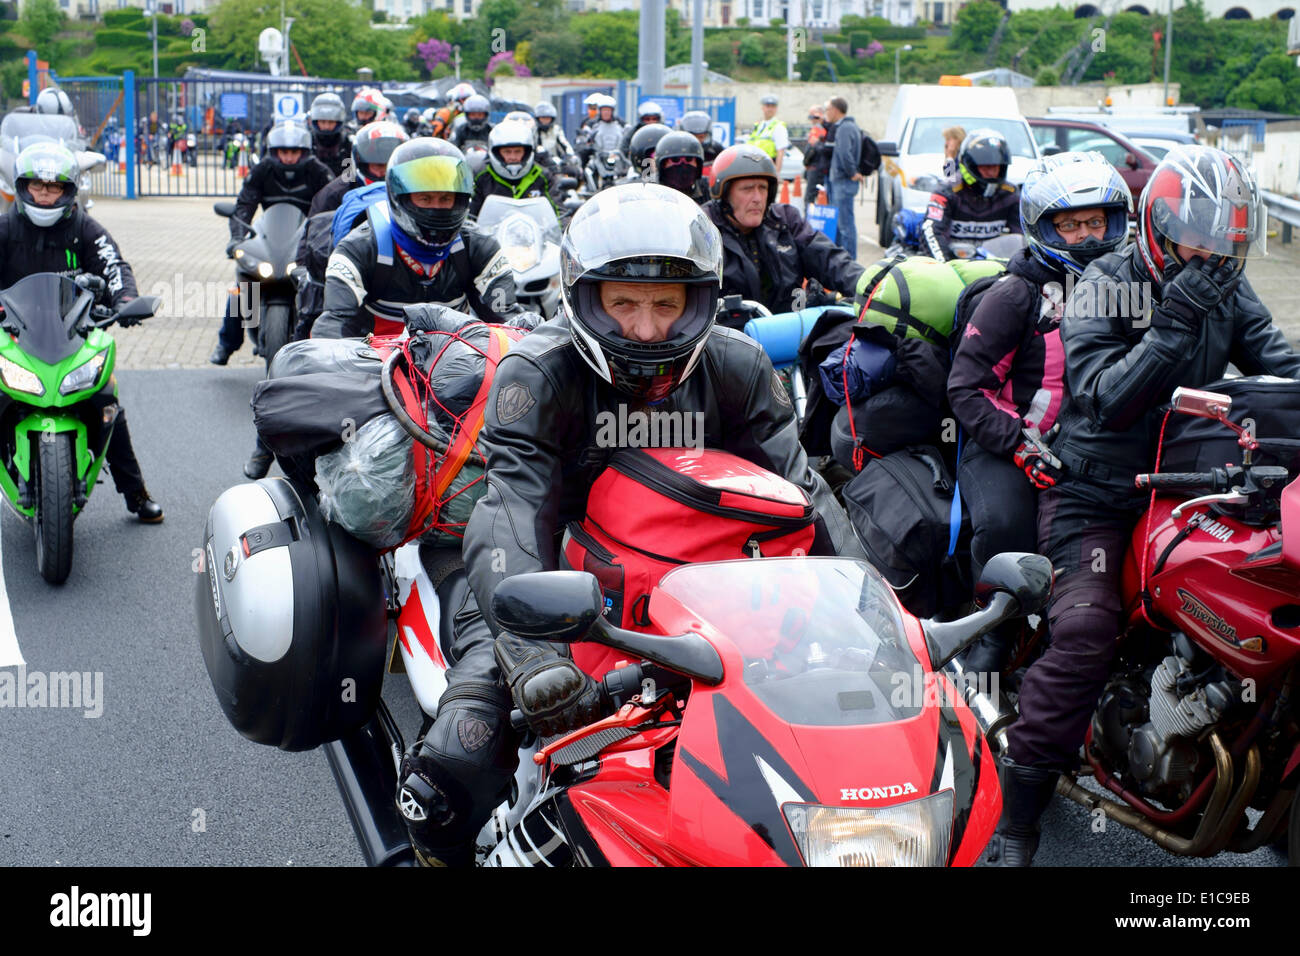 Douglas, Isle of Man. 30th May, 2014. Motorcycling enthusiasts arriving for the 2014 TT. The festival comprises a week of qualifying events followed by a week of racing on closed public roads. Credit:  Daisy Corlett/Alamy Live News Stock Photo